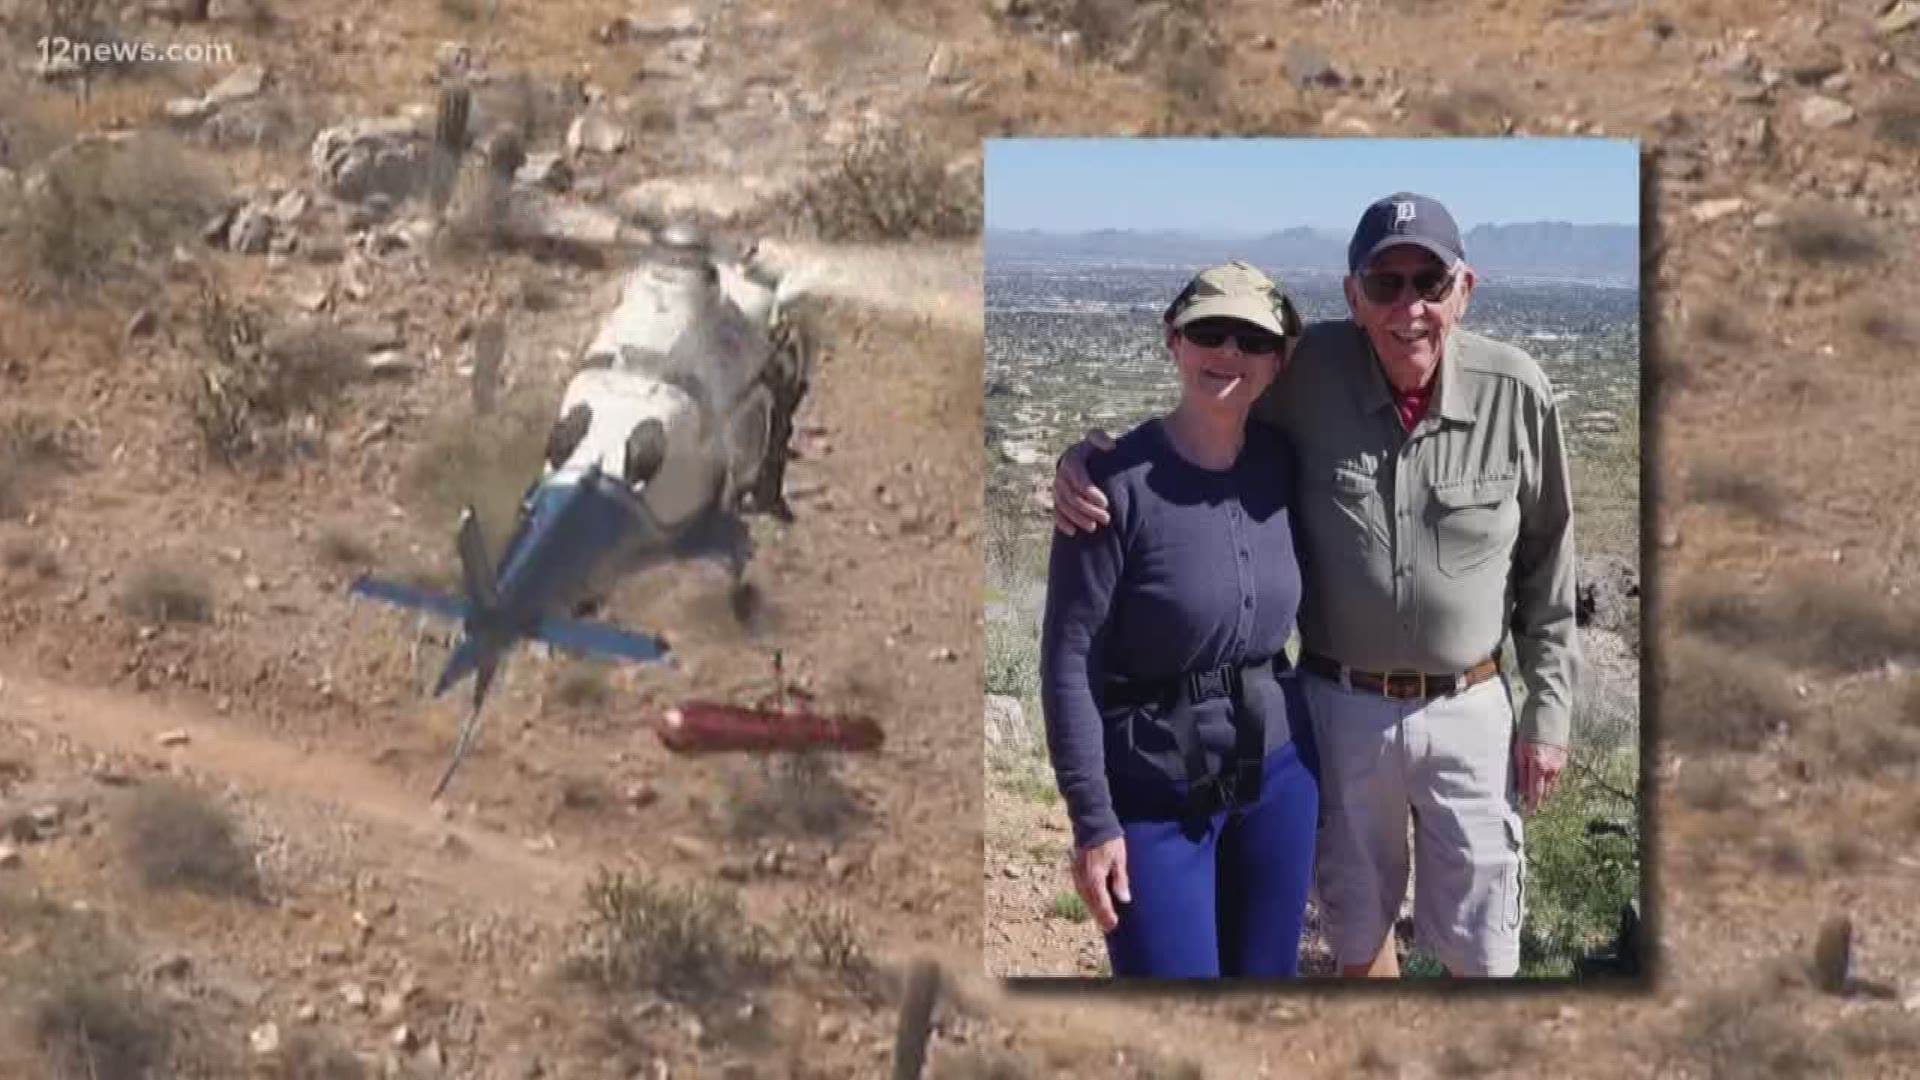 The mid-air spin of a 74-year-old Valley woman caught on camera earlier this week, as crews rescued the hiker from Piestewa Peak. Katalin Metro's husband, George, says she is still experiencing dizziness and nausea. We spoke to a doctor about how the spinning could impact her health.